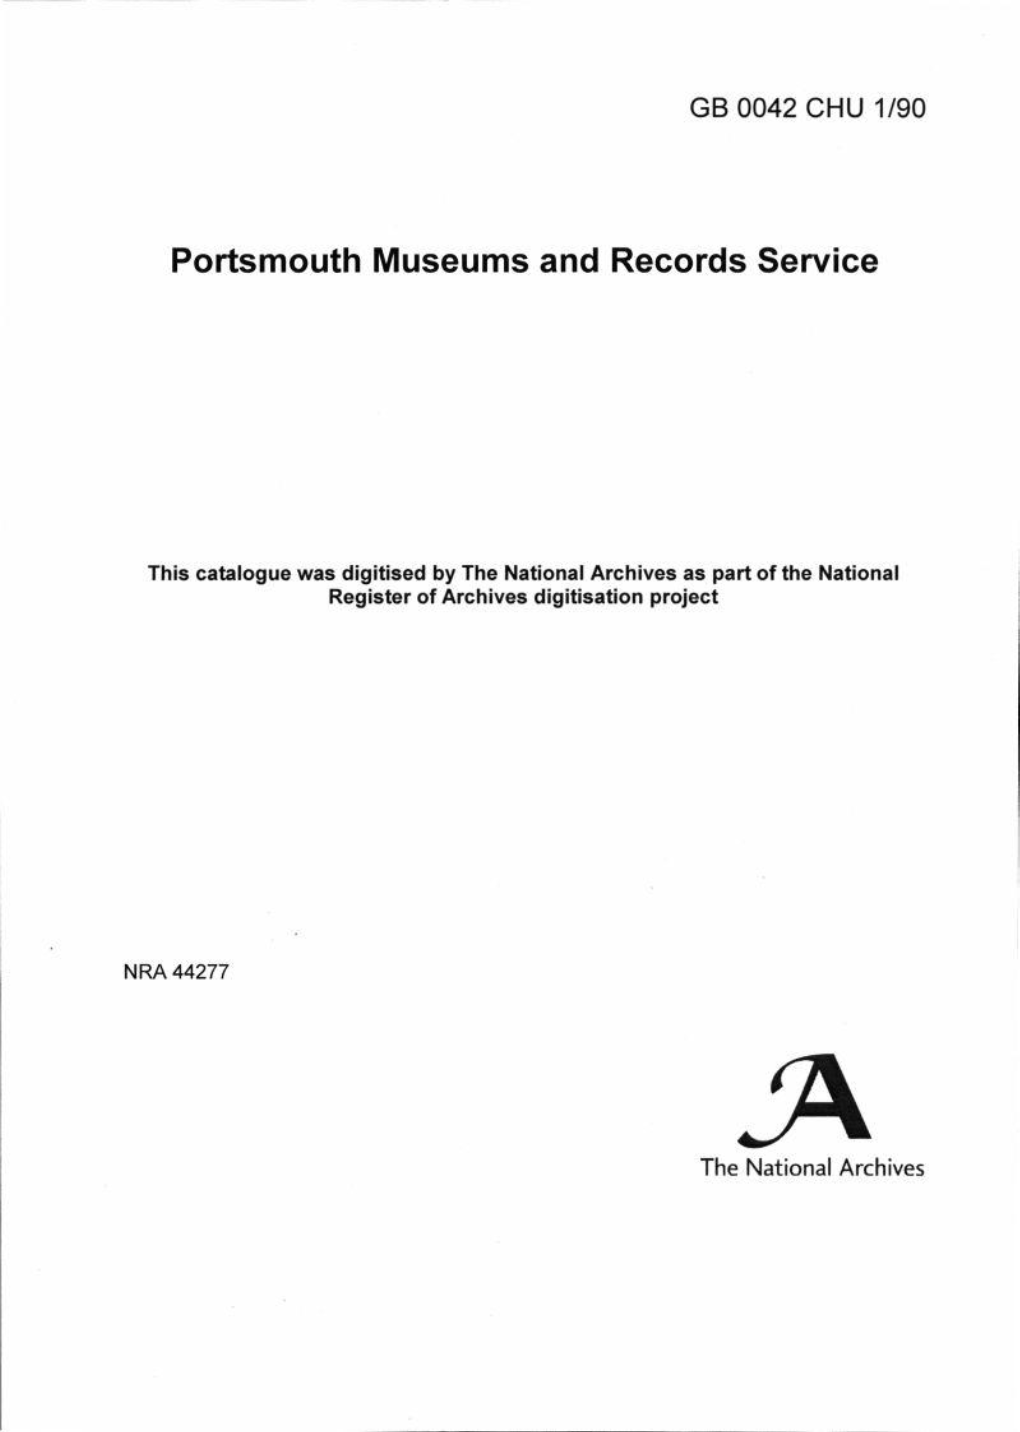 Portsmouth Museums and Records Service